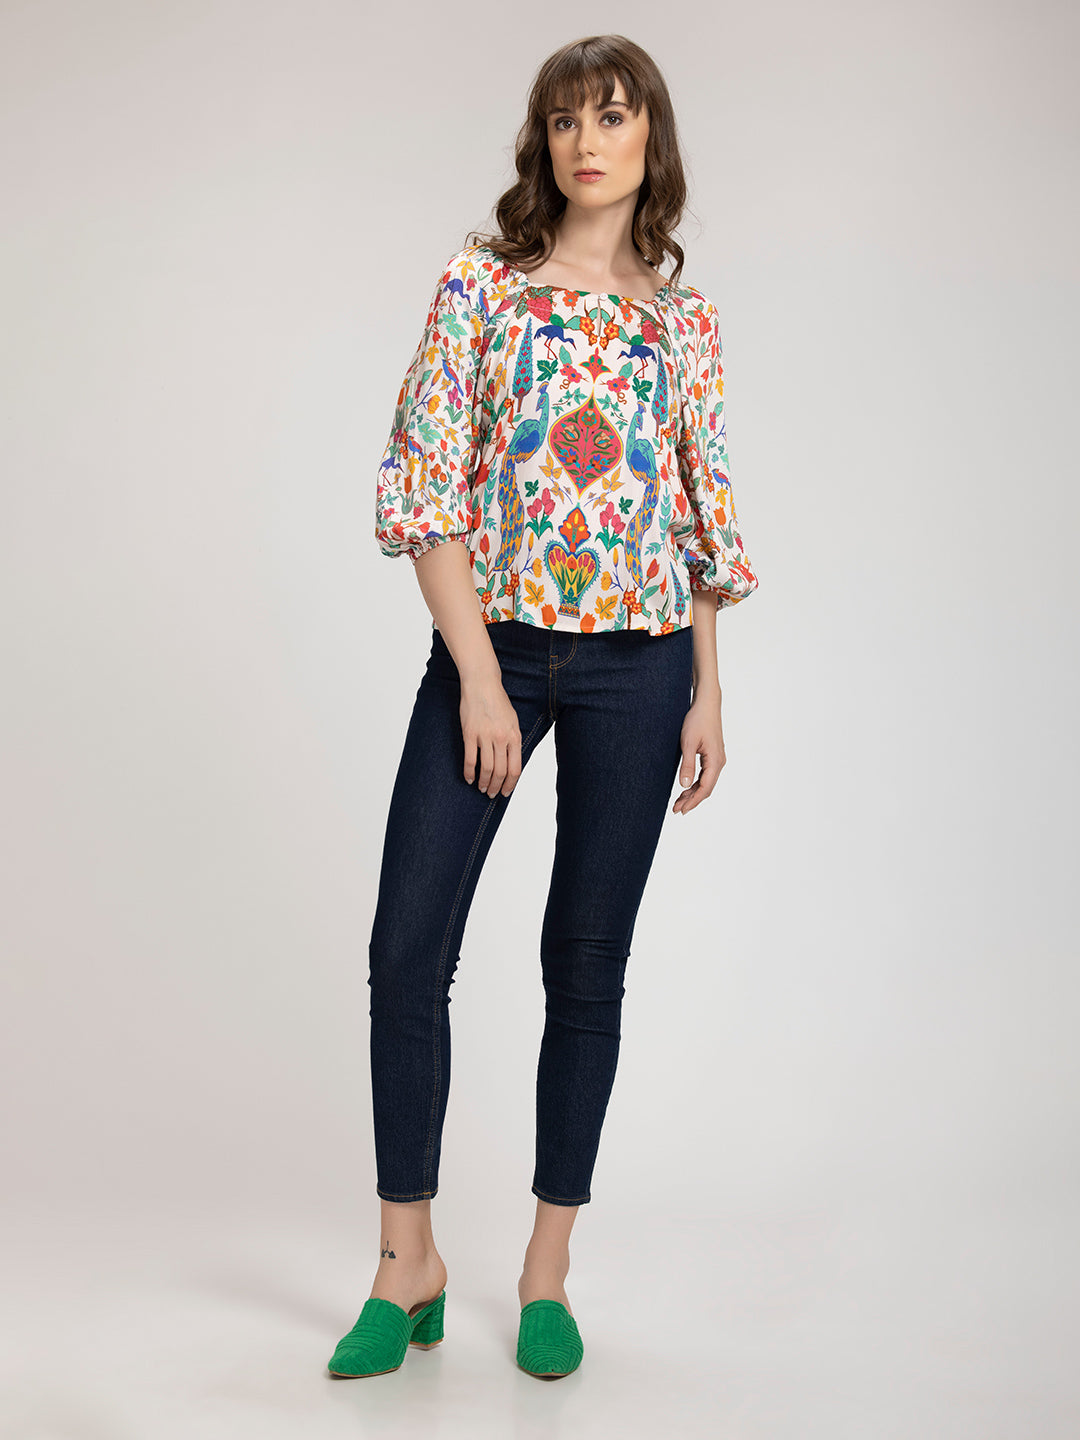 Sonoma top from Shaye , Top for women